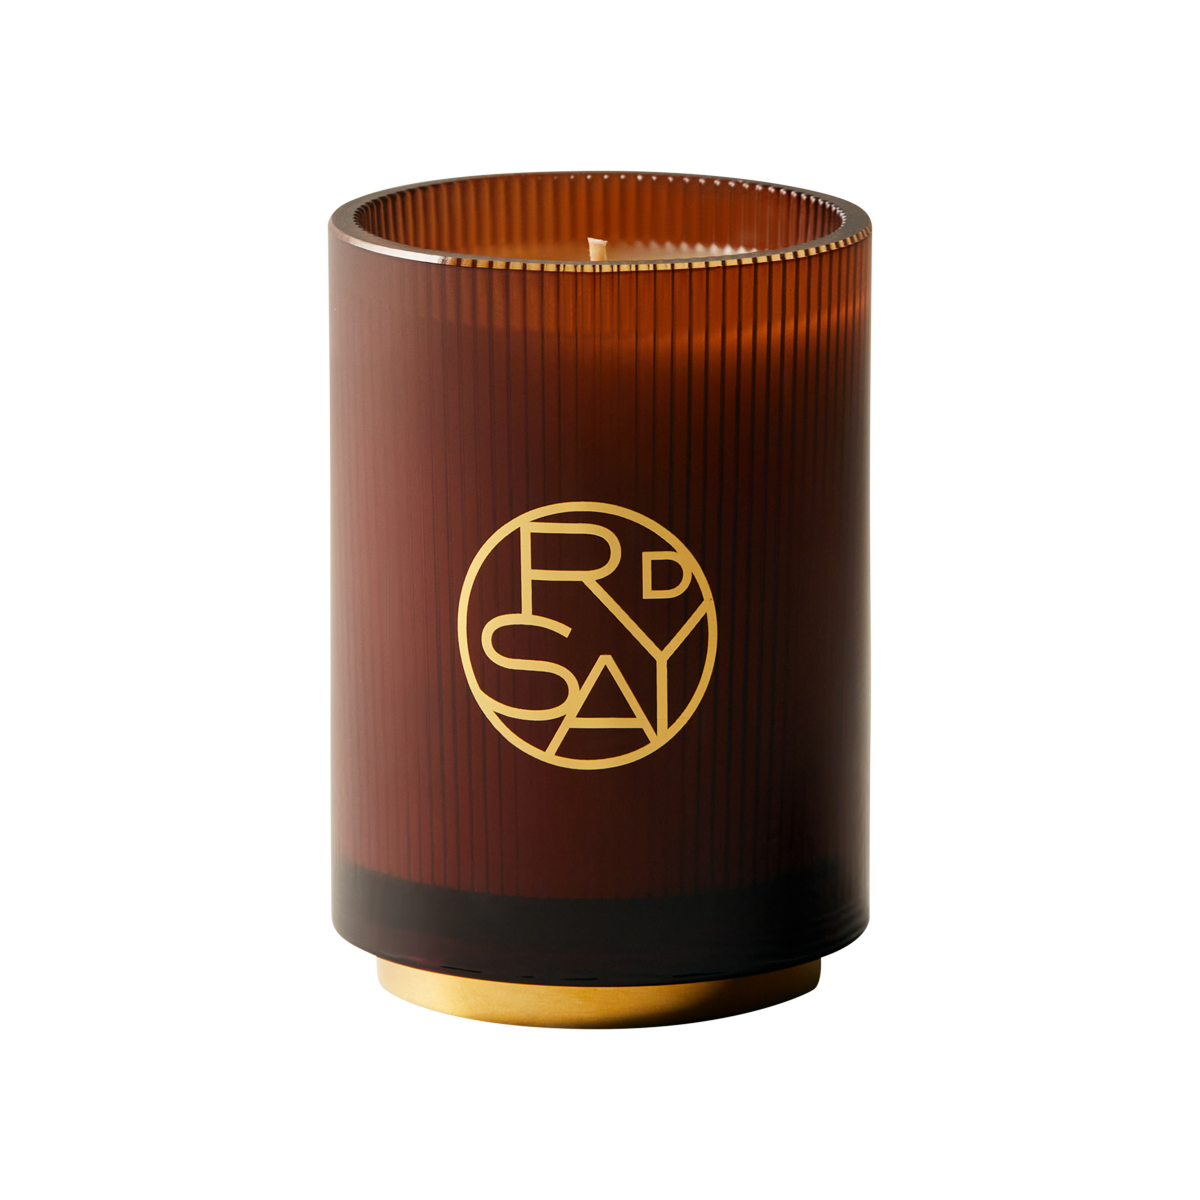 D'Orsay - Scented Candle 15:00 Entre tes Mains